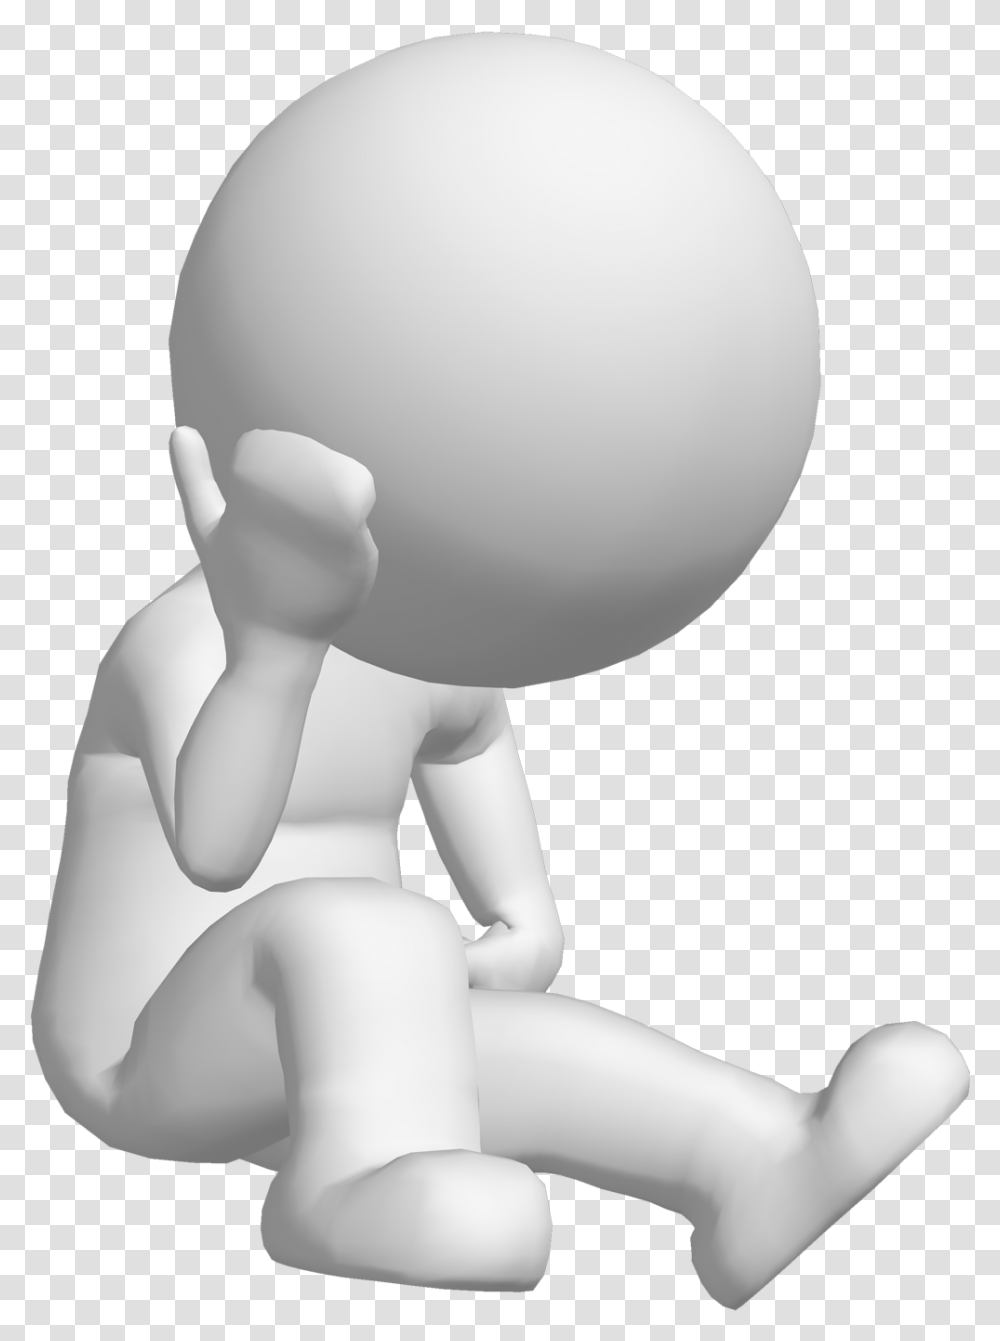 Thinking Excellent Some White Thinking Man, Balloon, Person, Figurine, Silhouette Transparent Png